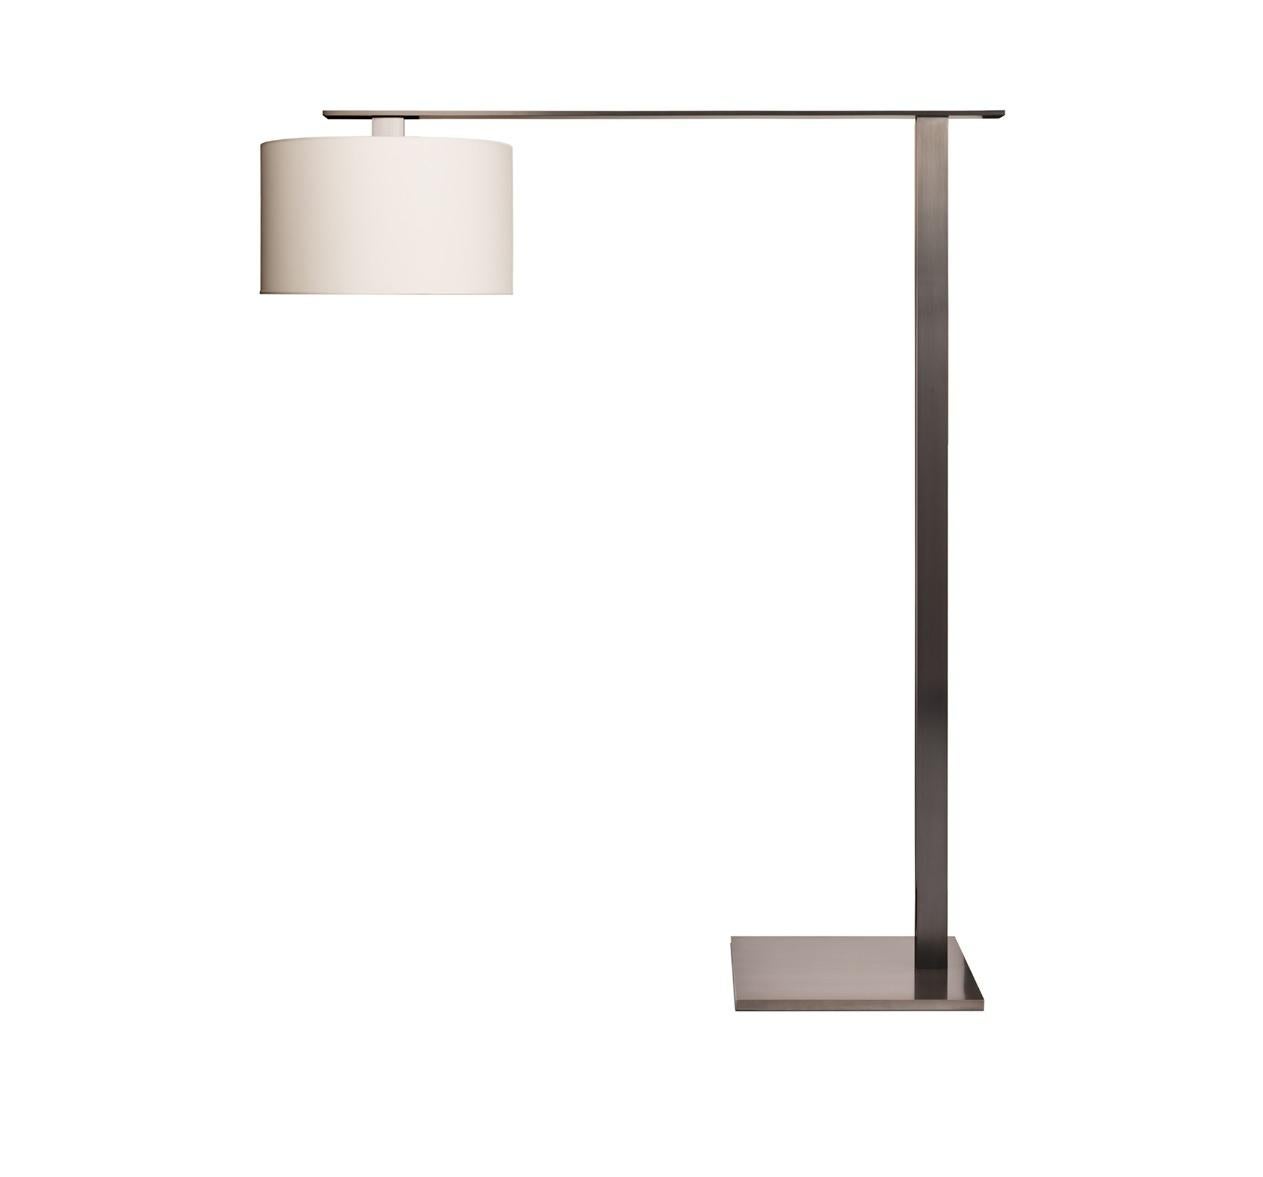 Atol floor lamp with paper shade by LK Edition
Dimensions: 143 x 30 x H 170 cm 
Materials: Patinated brass with paper shade. 
Also available with no paper shade. 
All our lamps can be wired according to each country. If sold to the USA it will